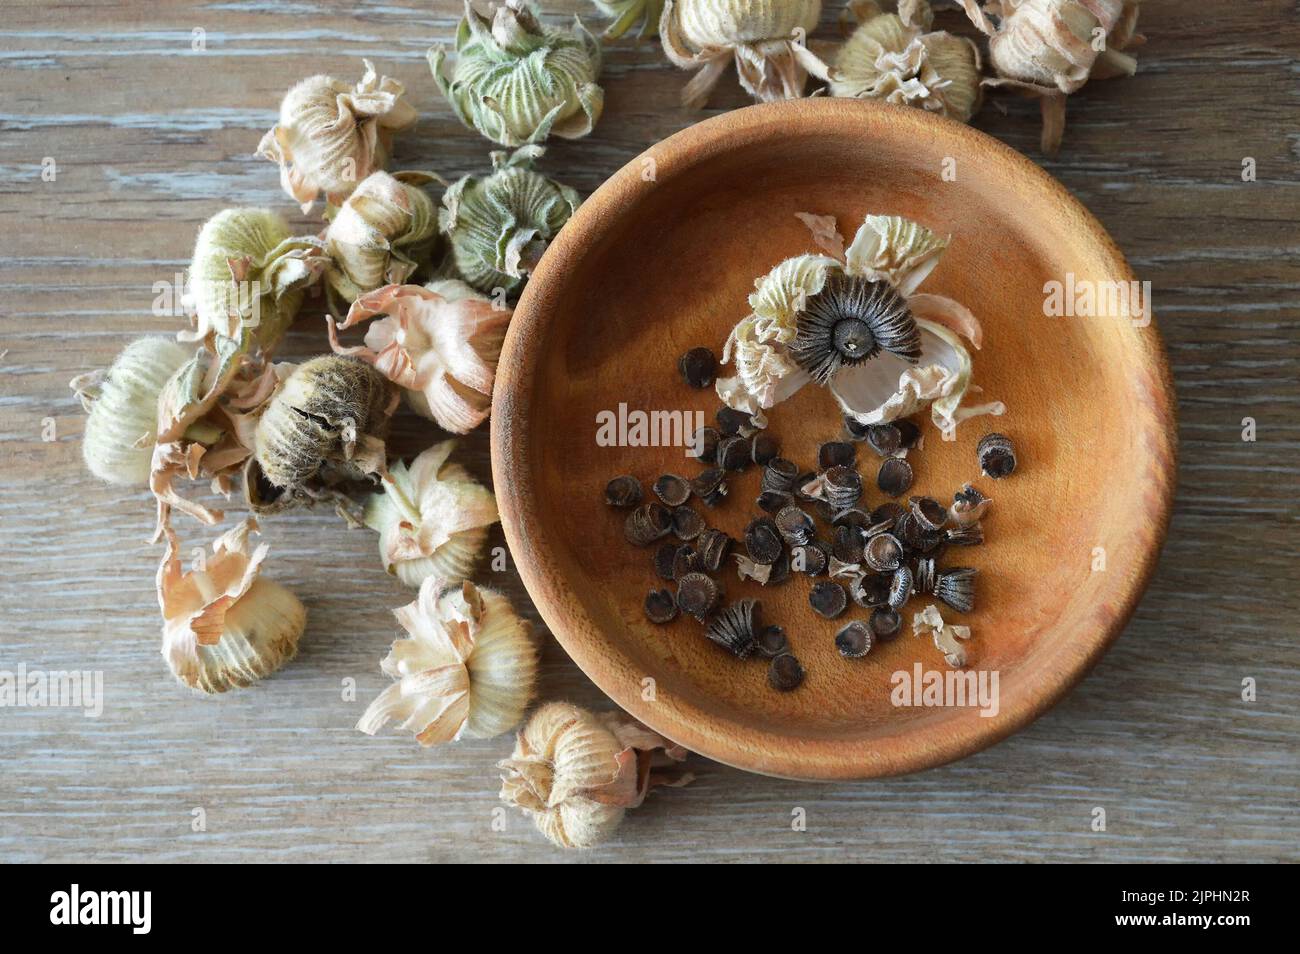 Top view of hollyhock seeds in wooden bowl. Collecting hollyhock flower seeds from dried seed pods Stock Photo